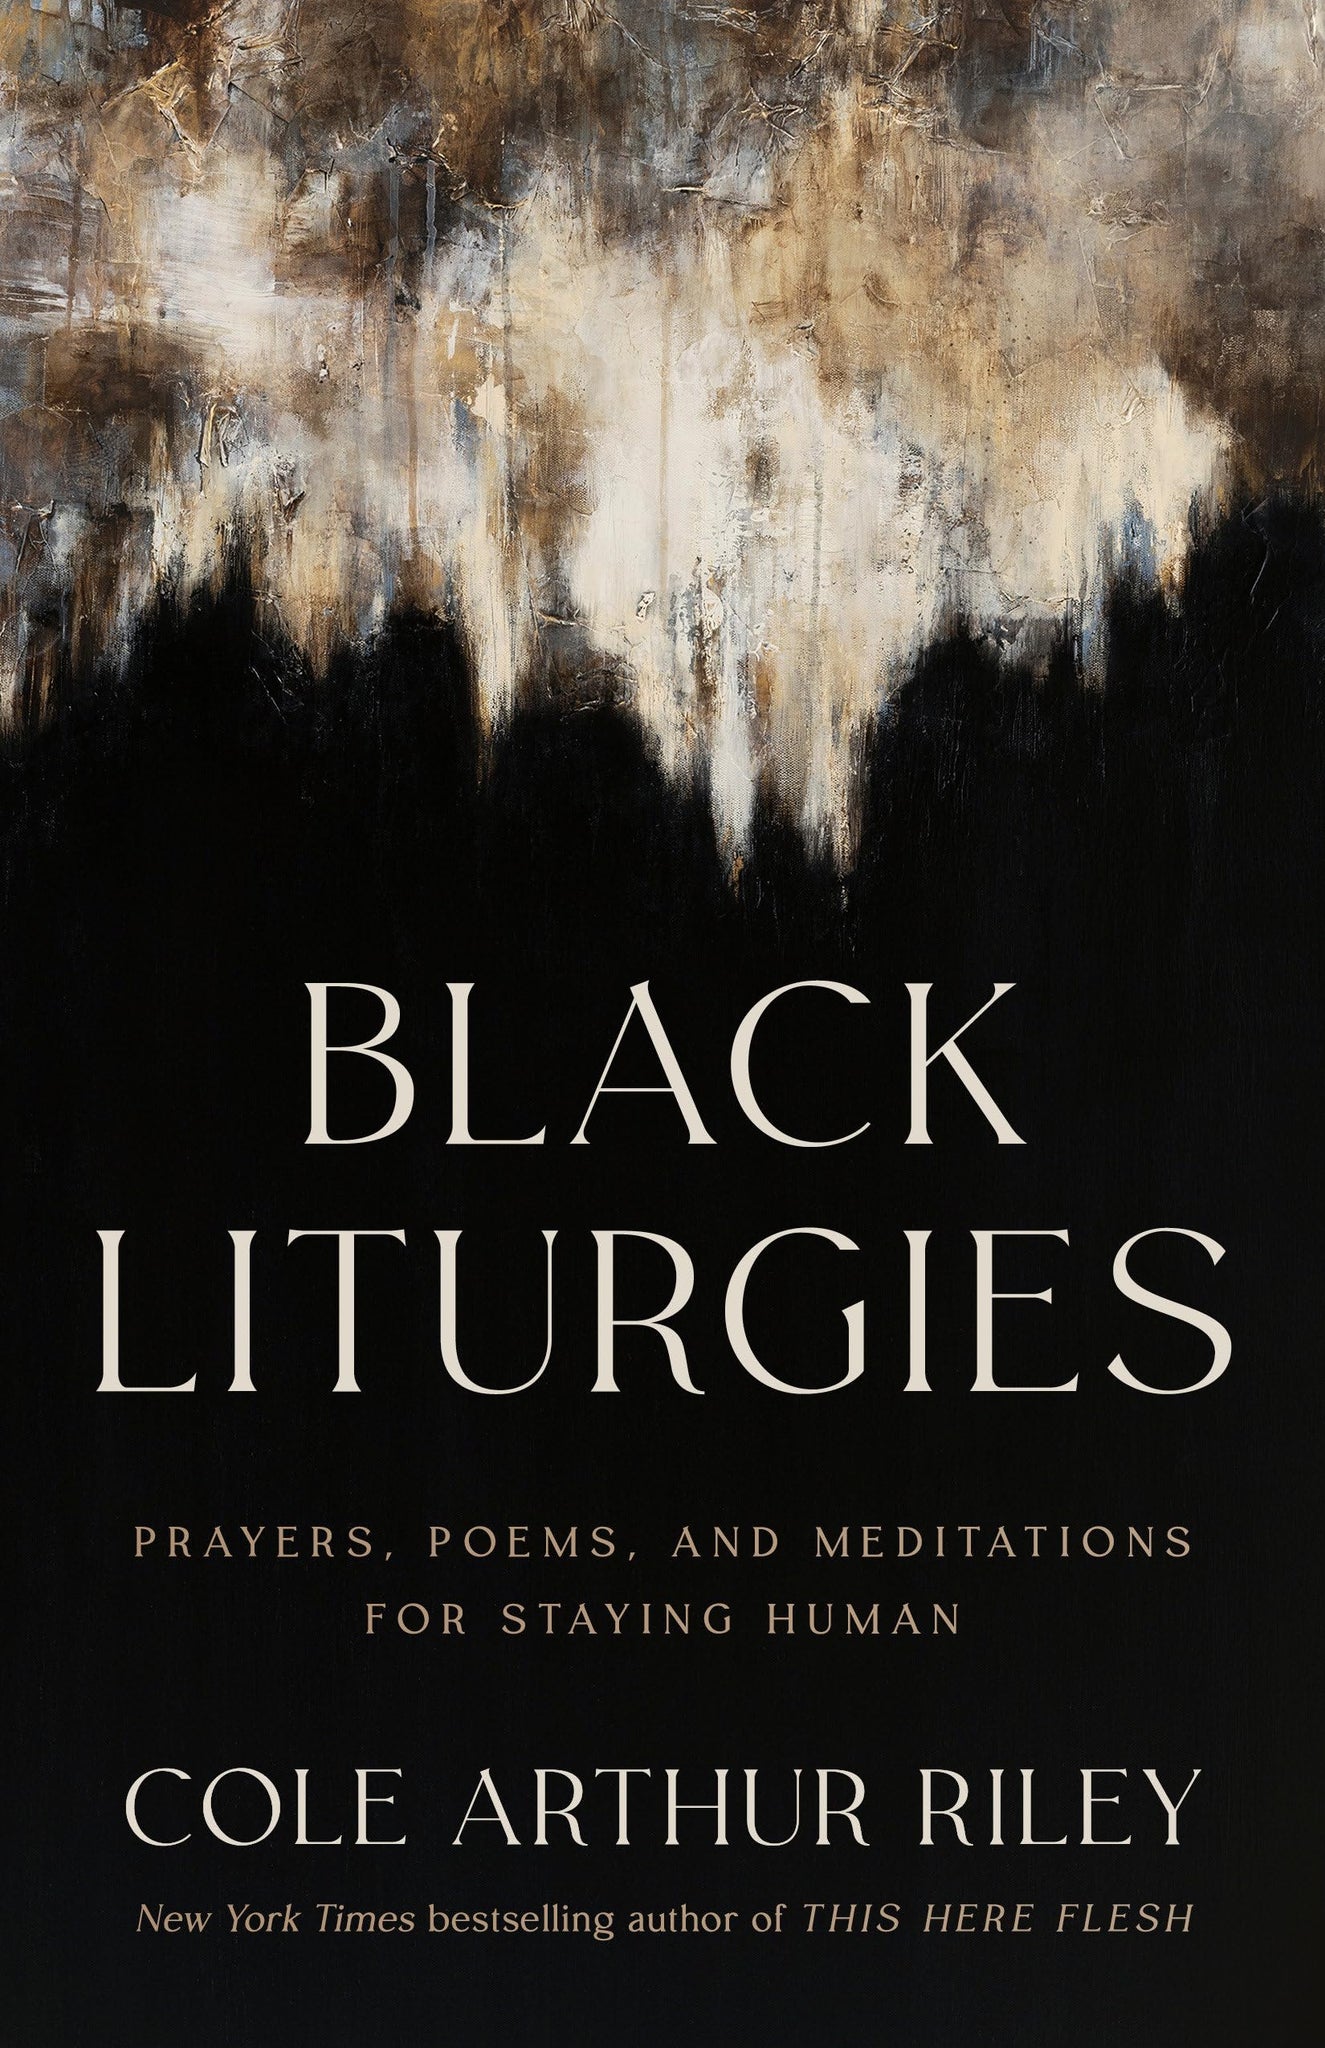 Black Liturgies: Prayers, Poems, and Meditations for Staying Human (Hardcover)